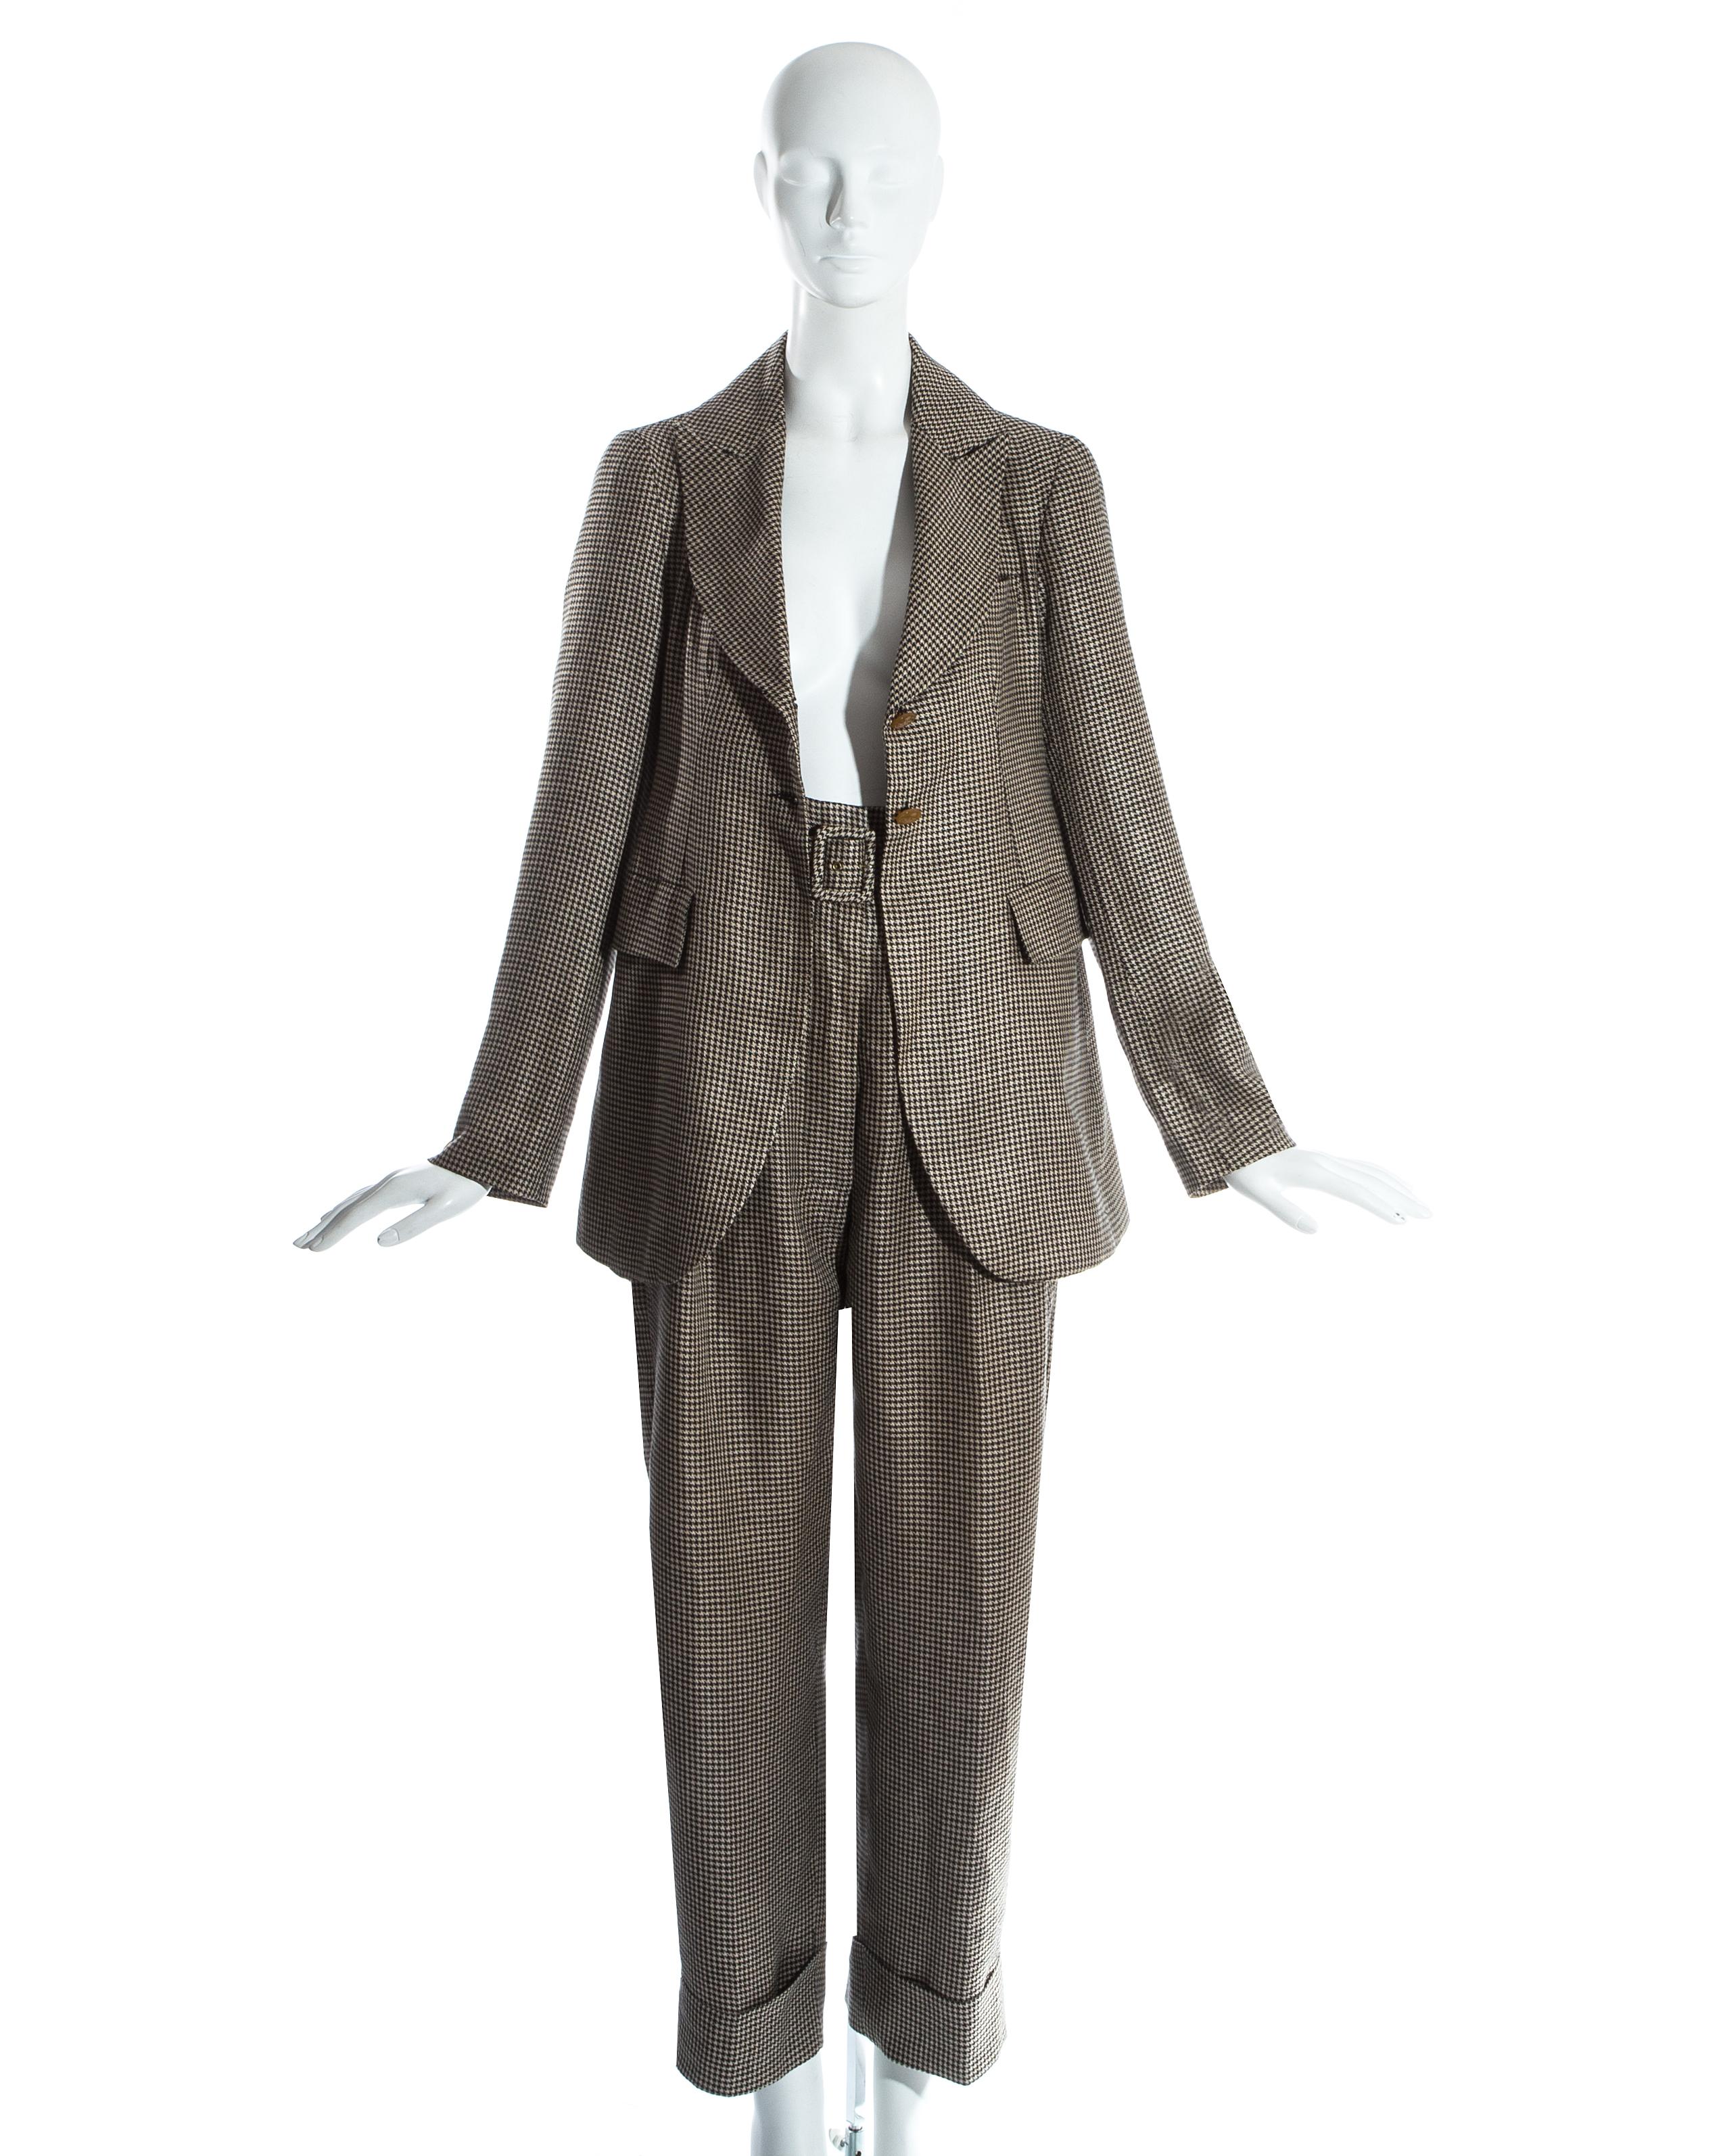 Vivienne Westwood black and white houndstooth wool pant suit. Blazer jacket with wide lapel and 2 button fastenings. High waisted turn up pants with matching fabric belt. 

Vive la Cocotte, Fall-Winter 1995